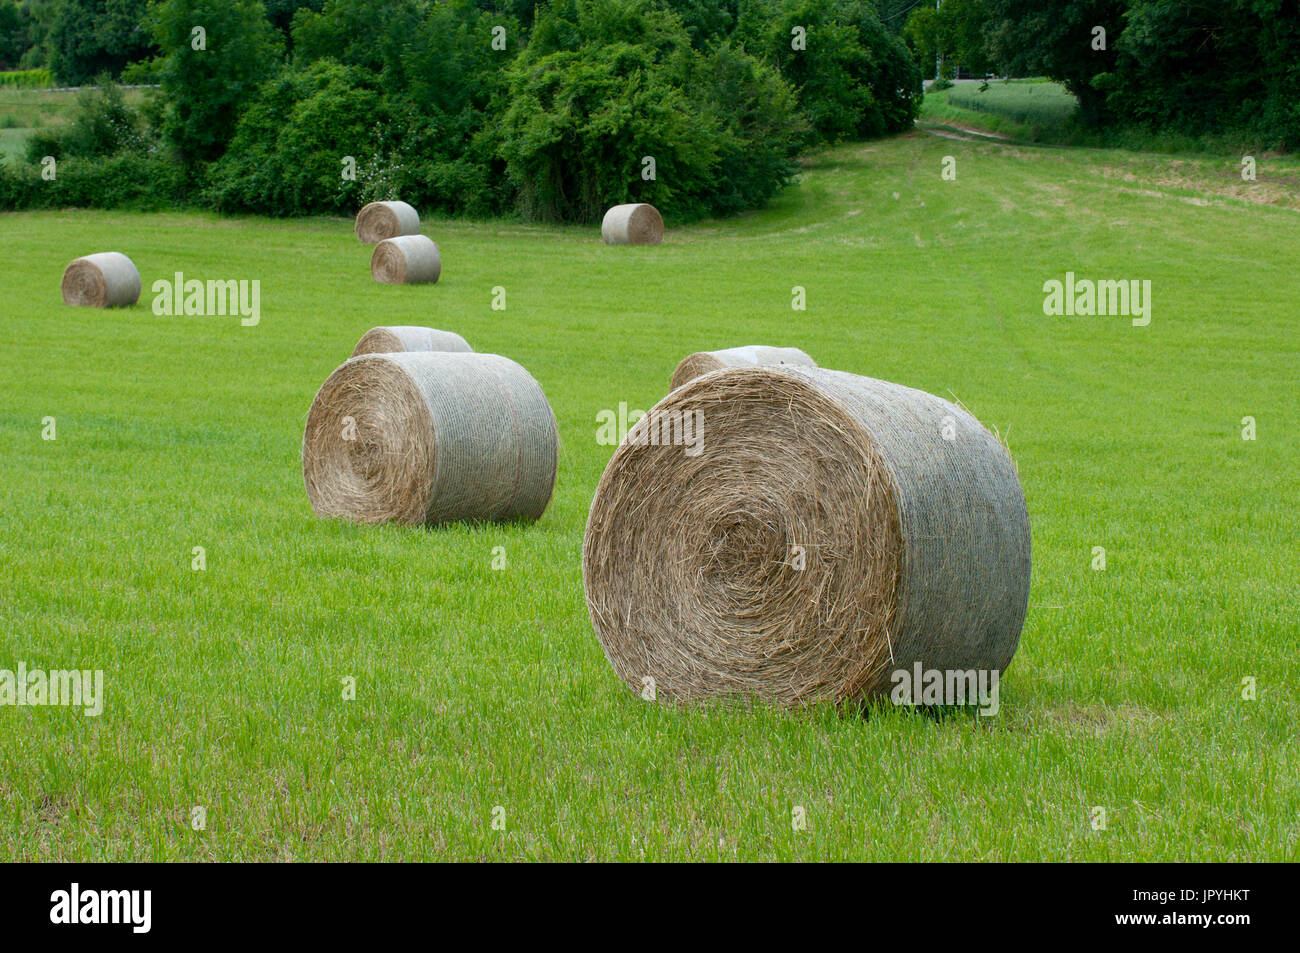 Stacks of straw in a field Stock Photo